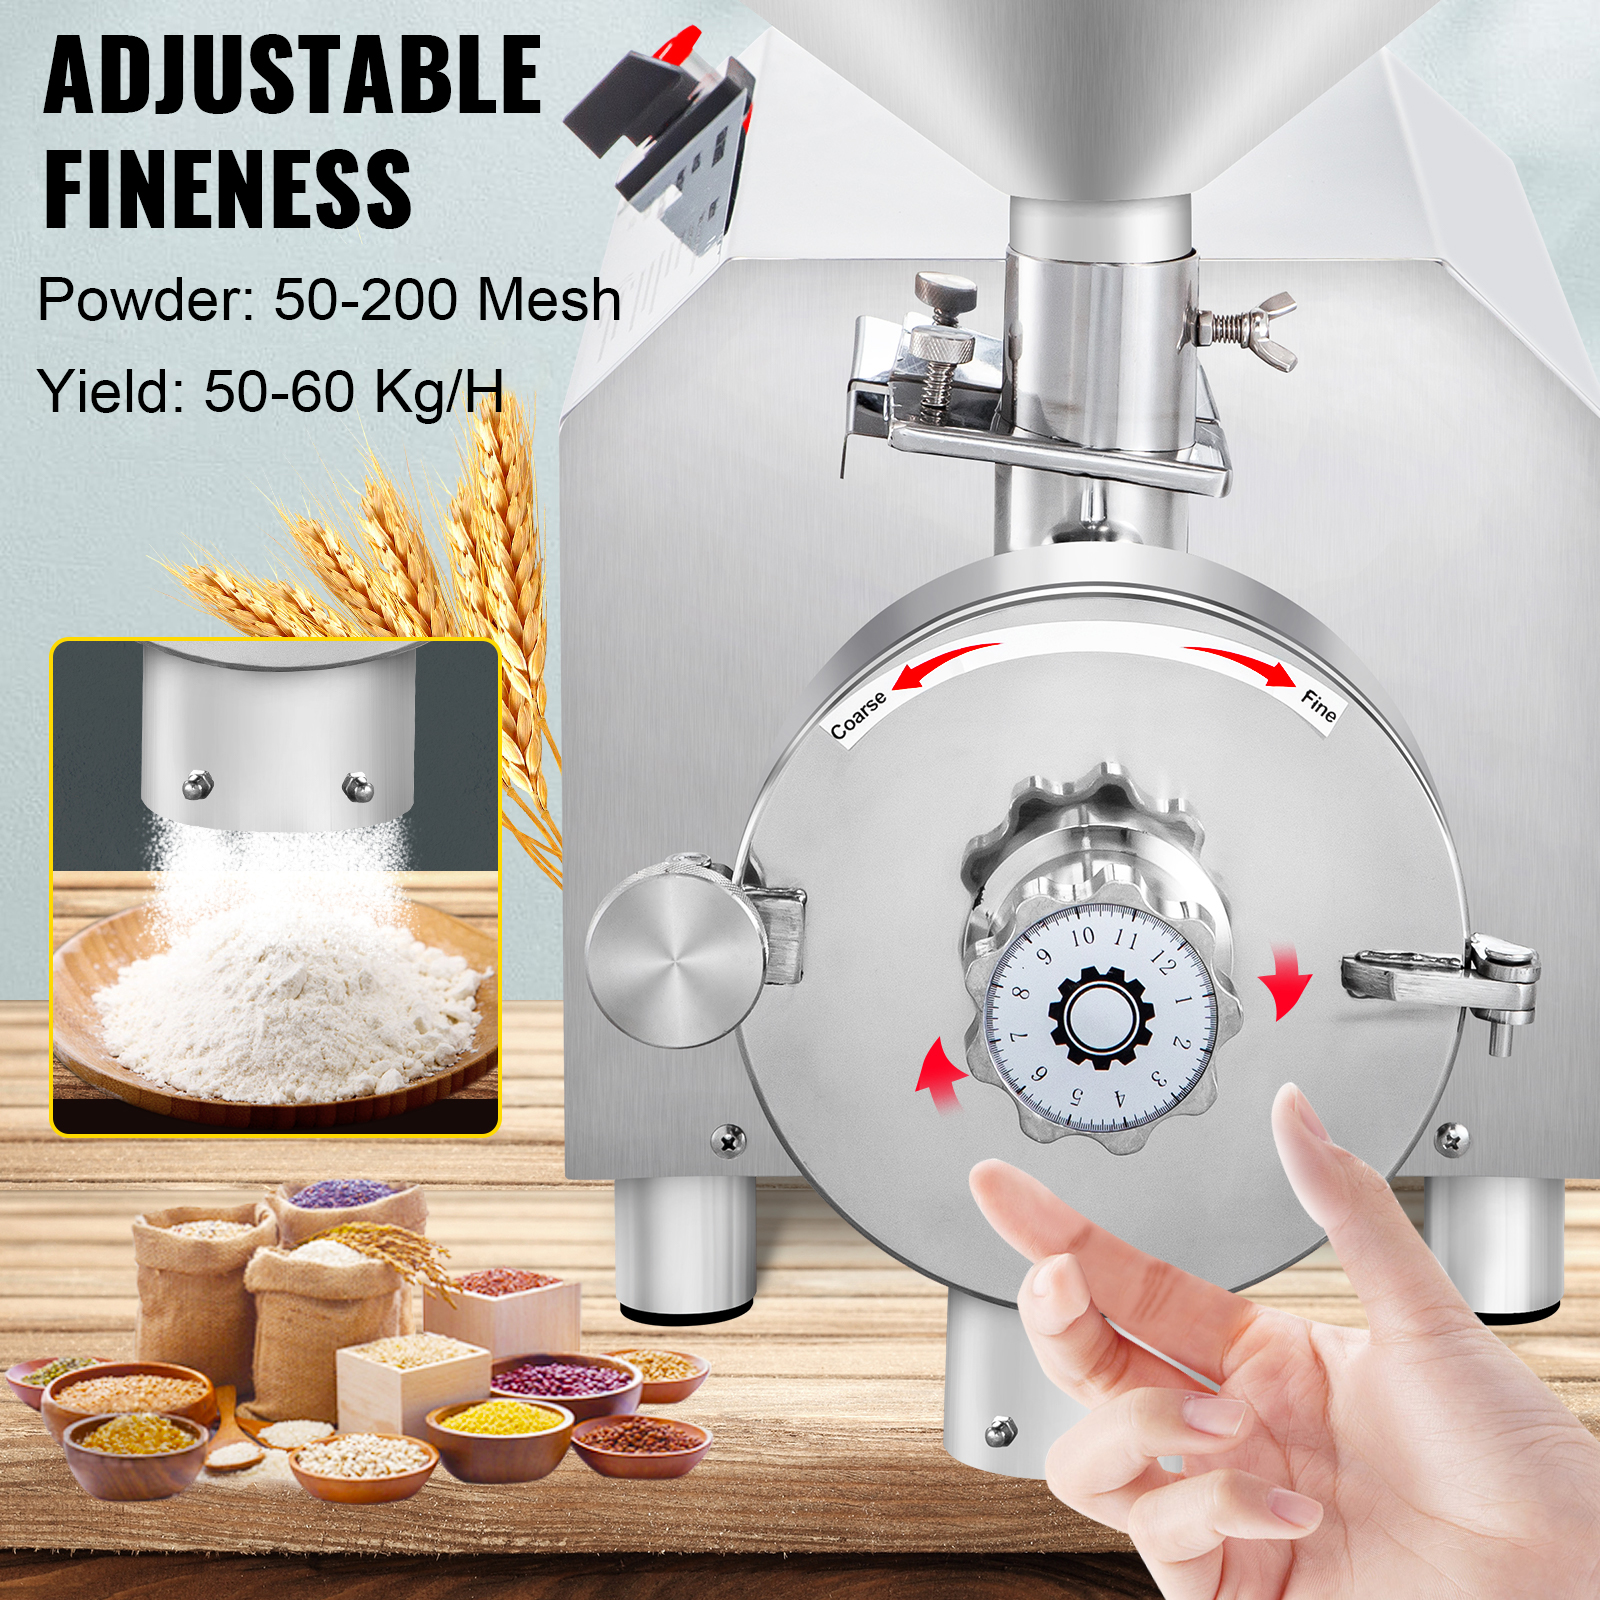 3000W Electric Commercial Meat Grinder Heavy Duty Sausage Maker